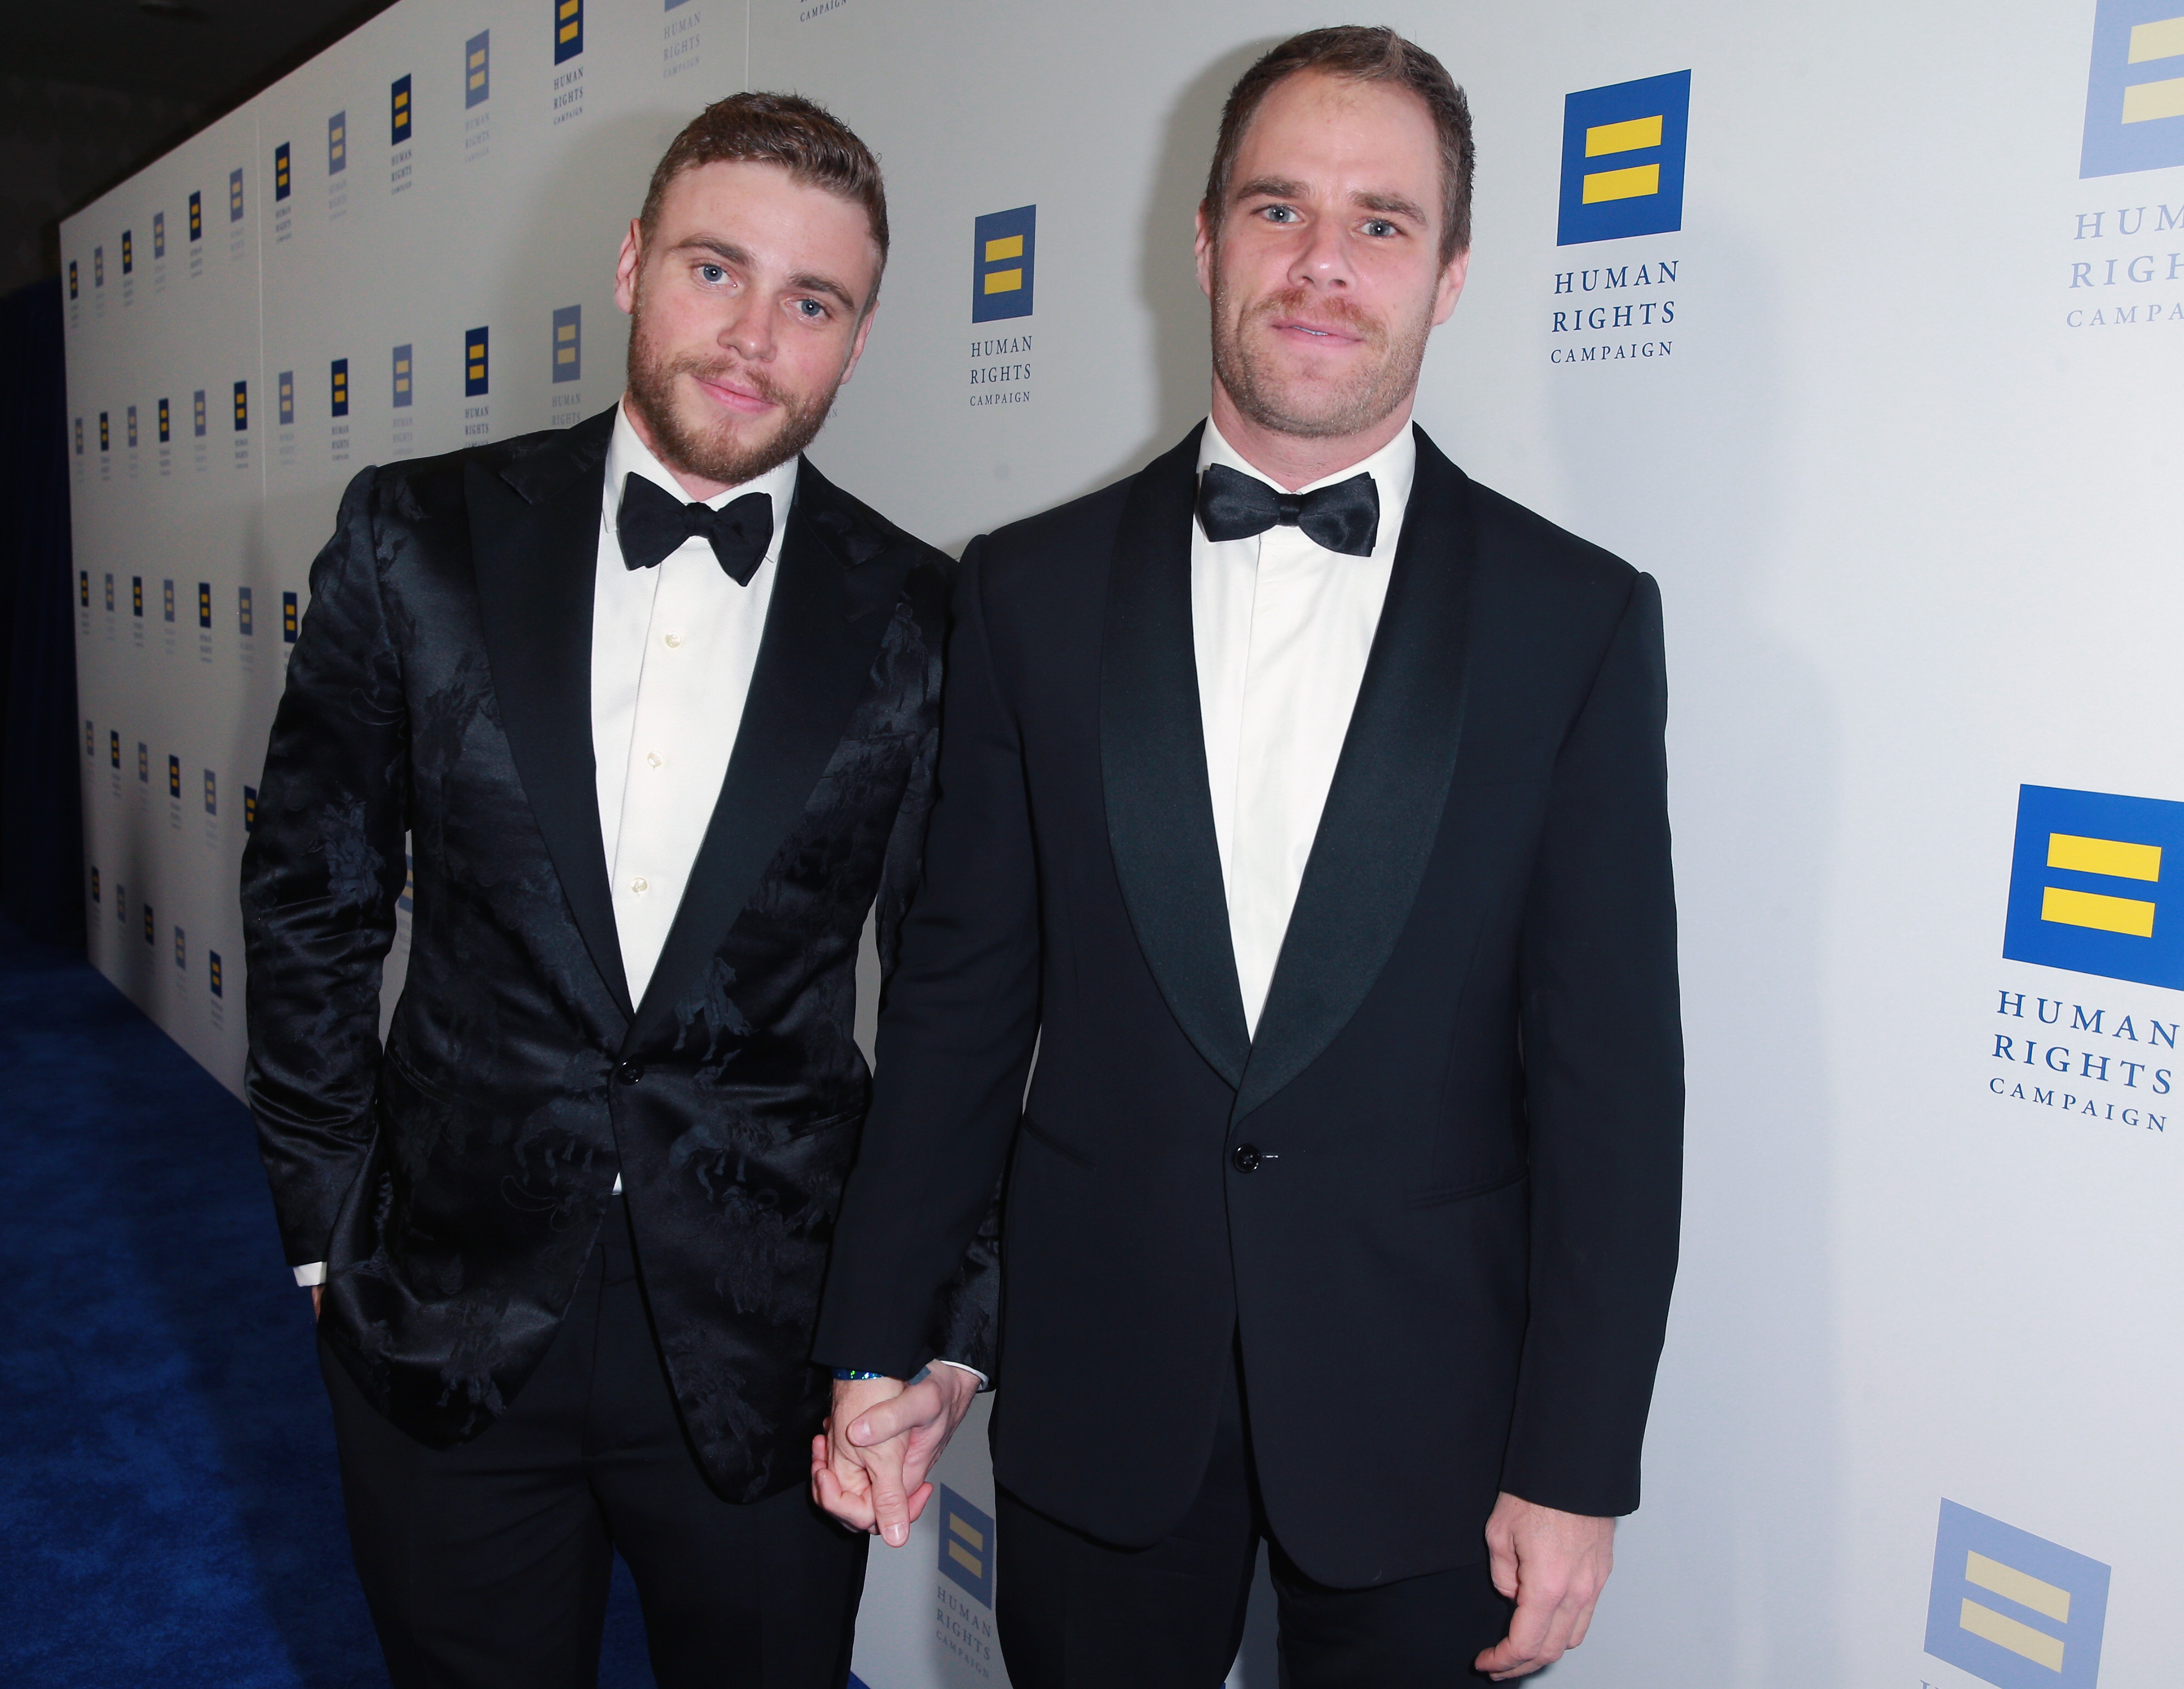 The Human Rights Campaign 2018 Los Angeles Gala Dinner - Red Carpet